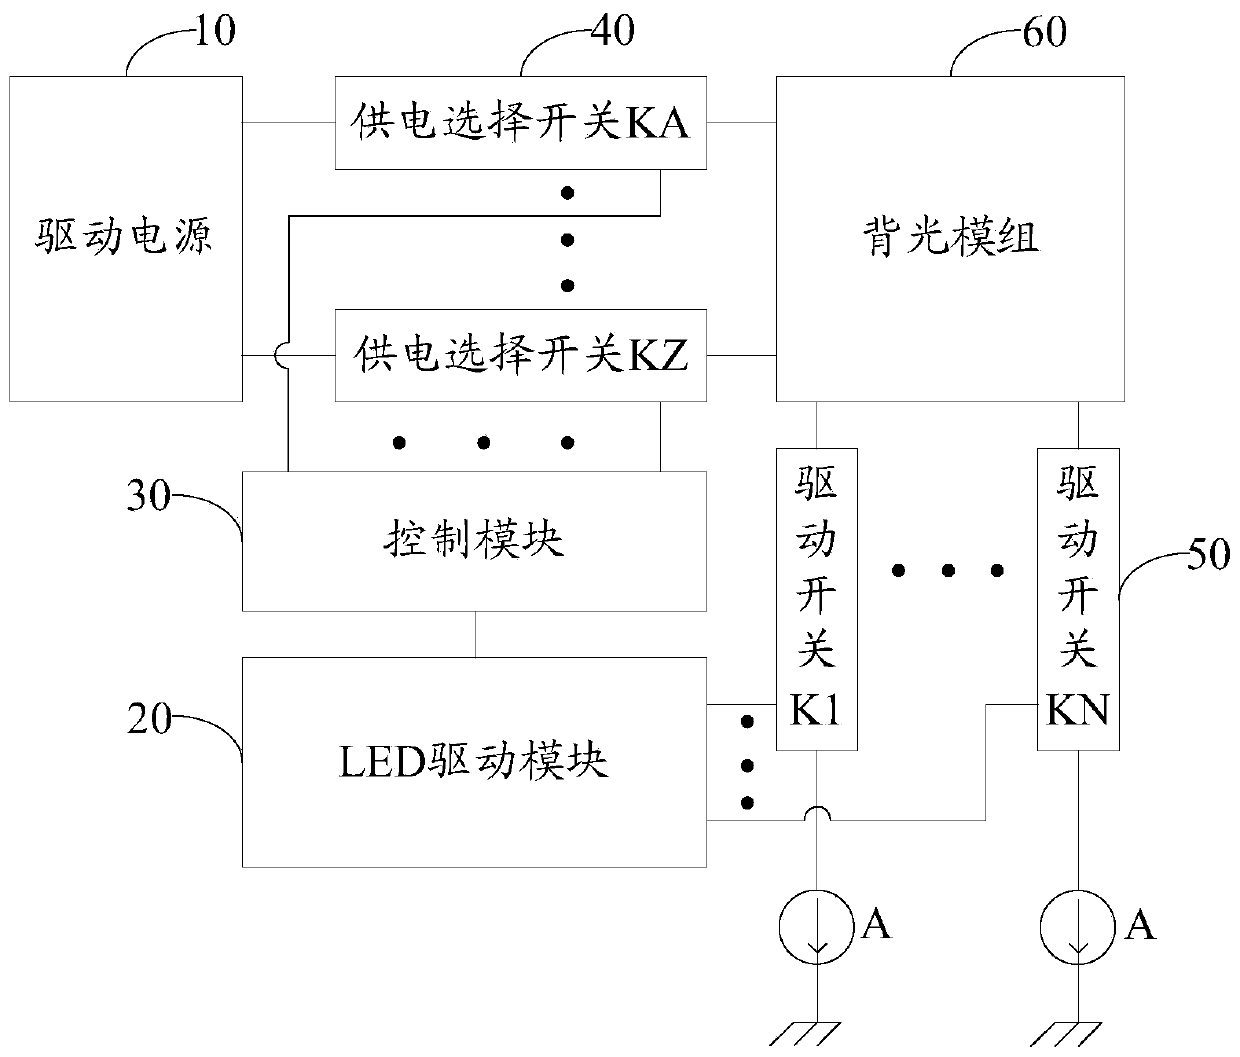 local DIMMING backlight drive circuit and electronic equipment